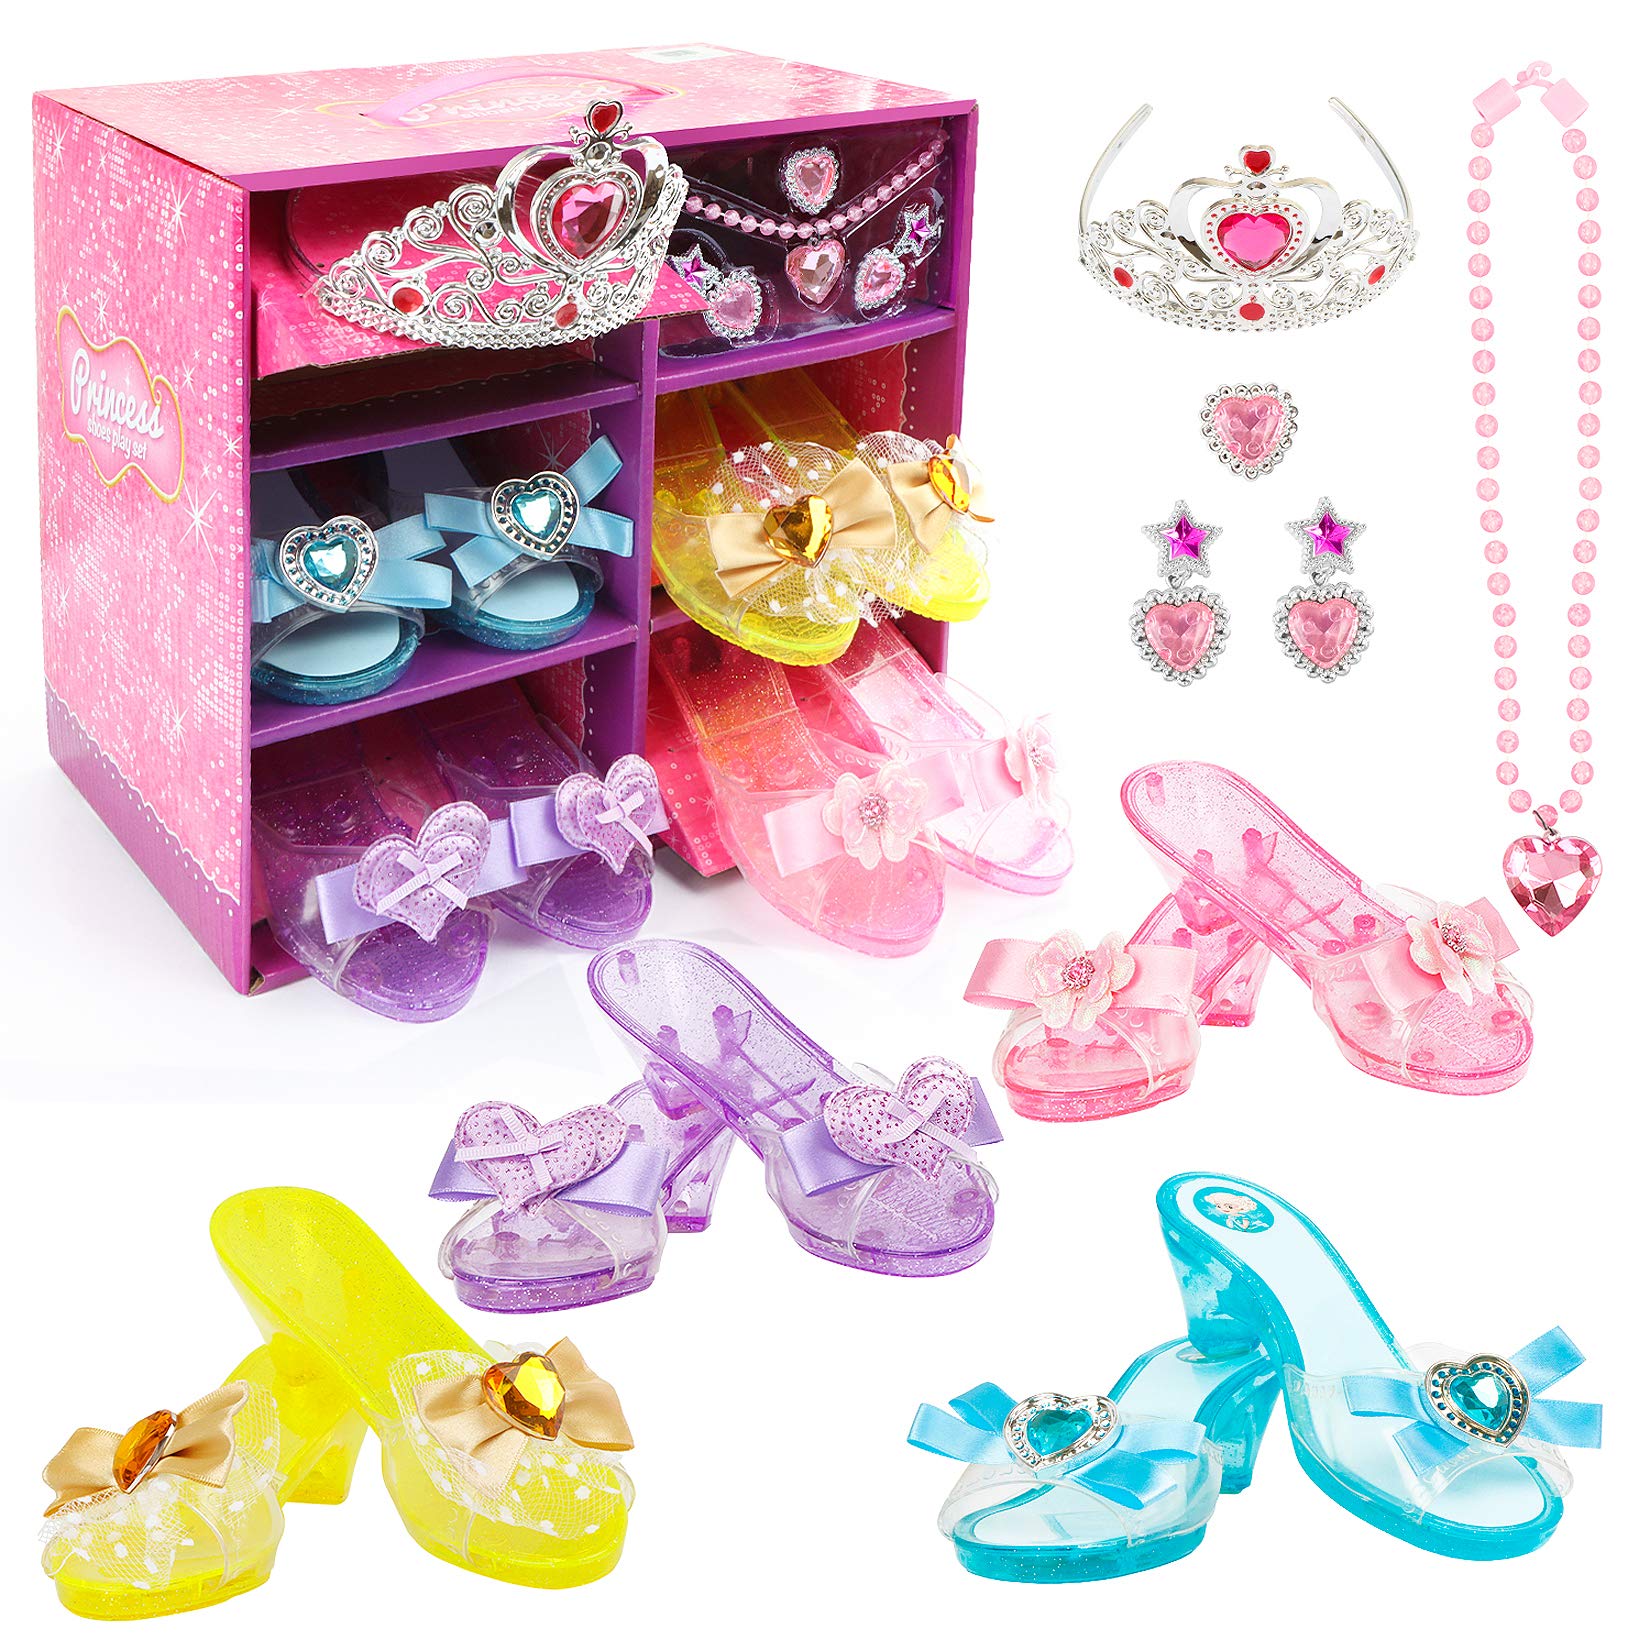 Hodola Girls Princess Dress up Shoes Set Girls Play Shoes and Jewelry Boutique Role Play Collection Shoes Set Gift Set with Princess Tiara and Accessories Jewelries for 3, 4,5 Years Old Girls and up